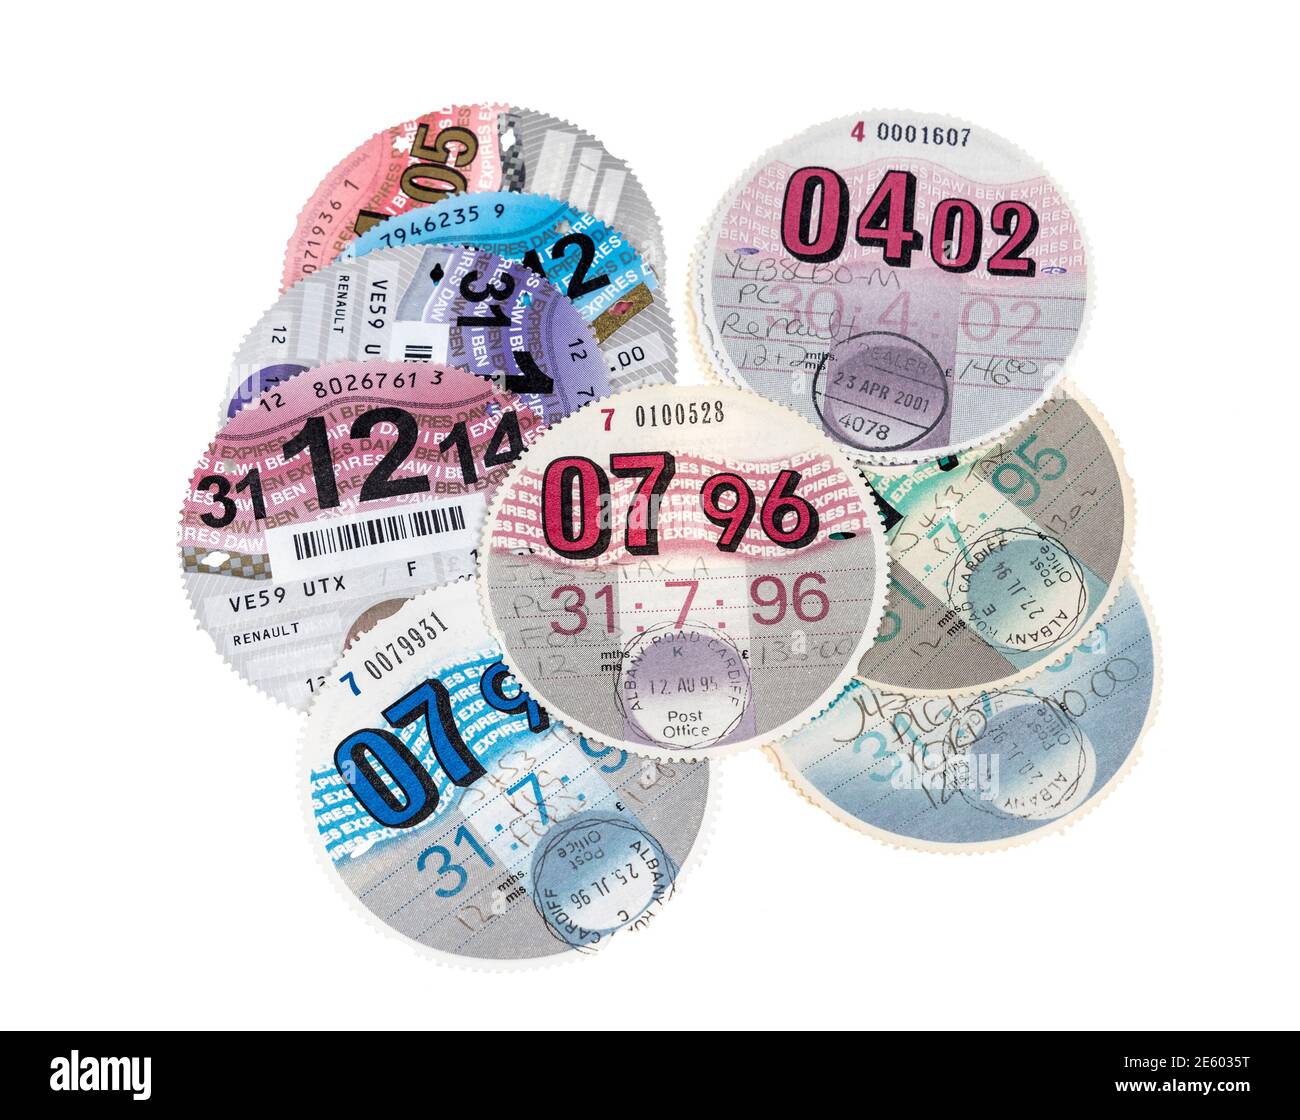 Selection of road fund tax discs for car, UK Stock Photo